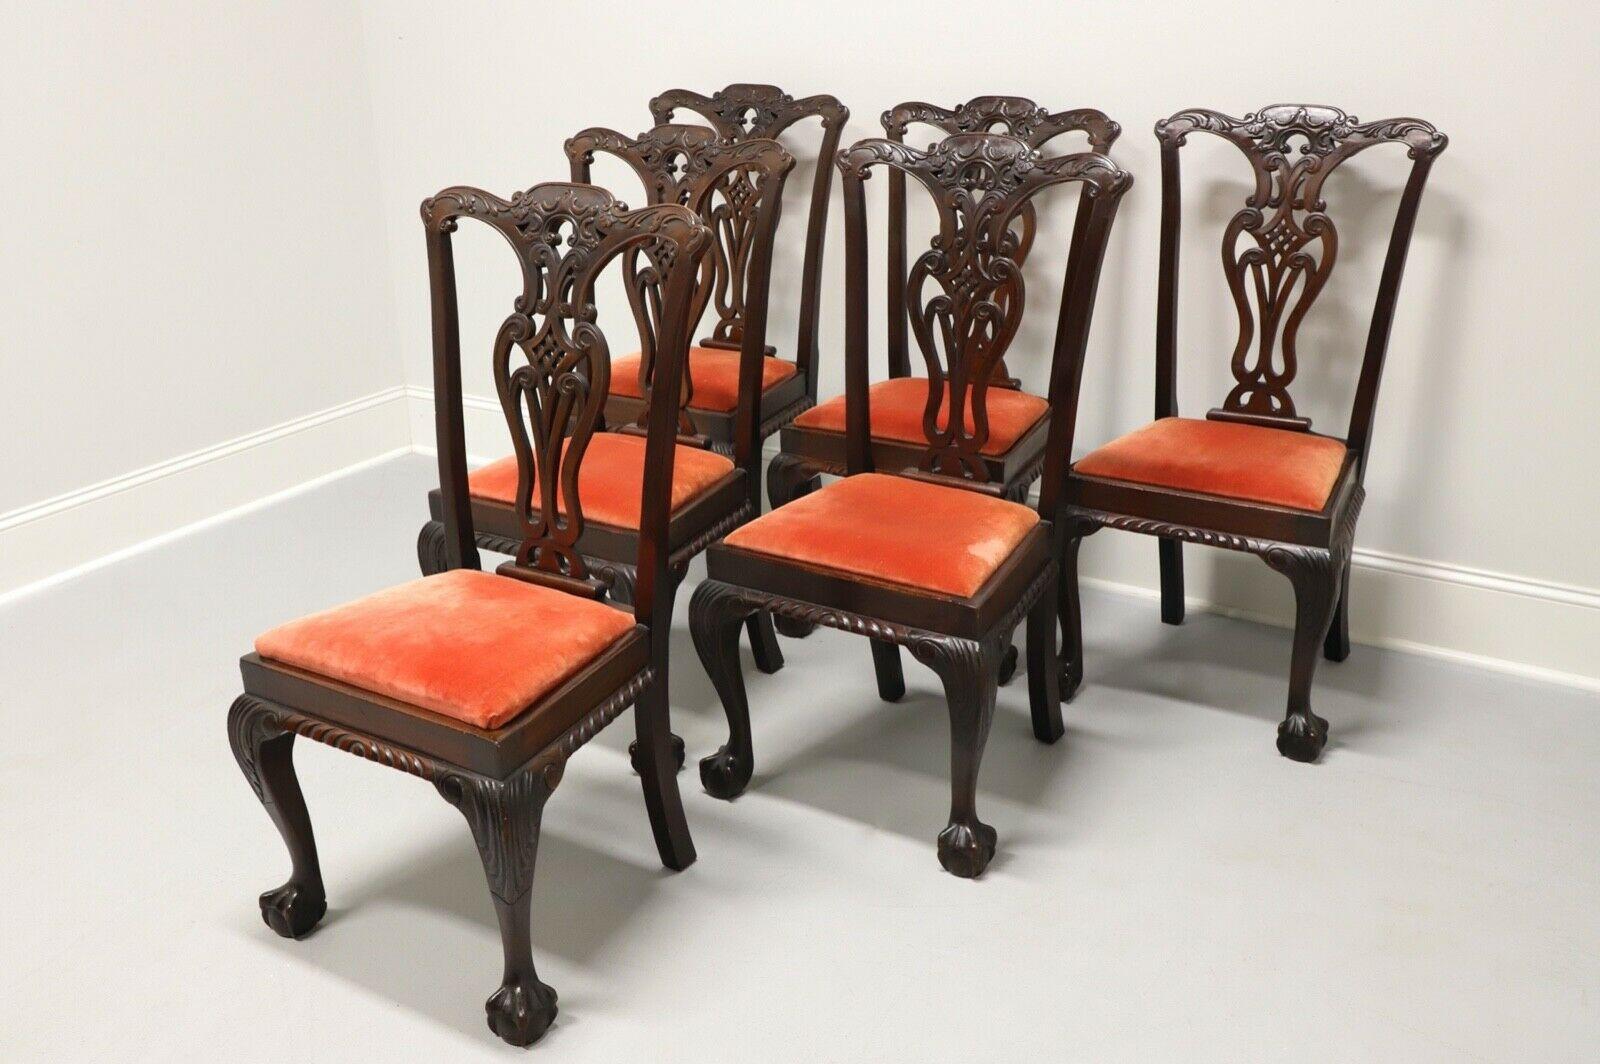 A set of six antique dining side chairs in solid Mahogany, unbranded. English Chippendale style with carved backsplats, red crushed velvet upholstered seats, gadroon carved aprons, cabriole legs with carved knees and ball in claw feet. Made in